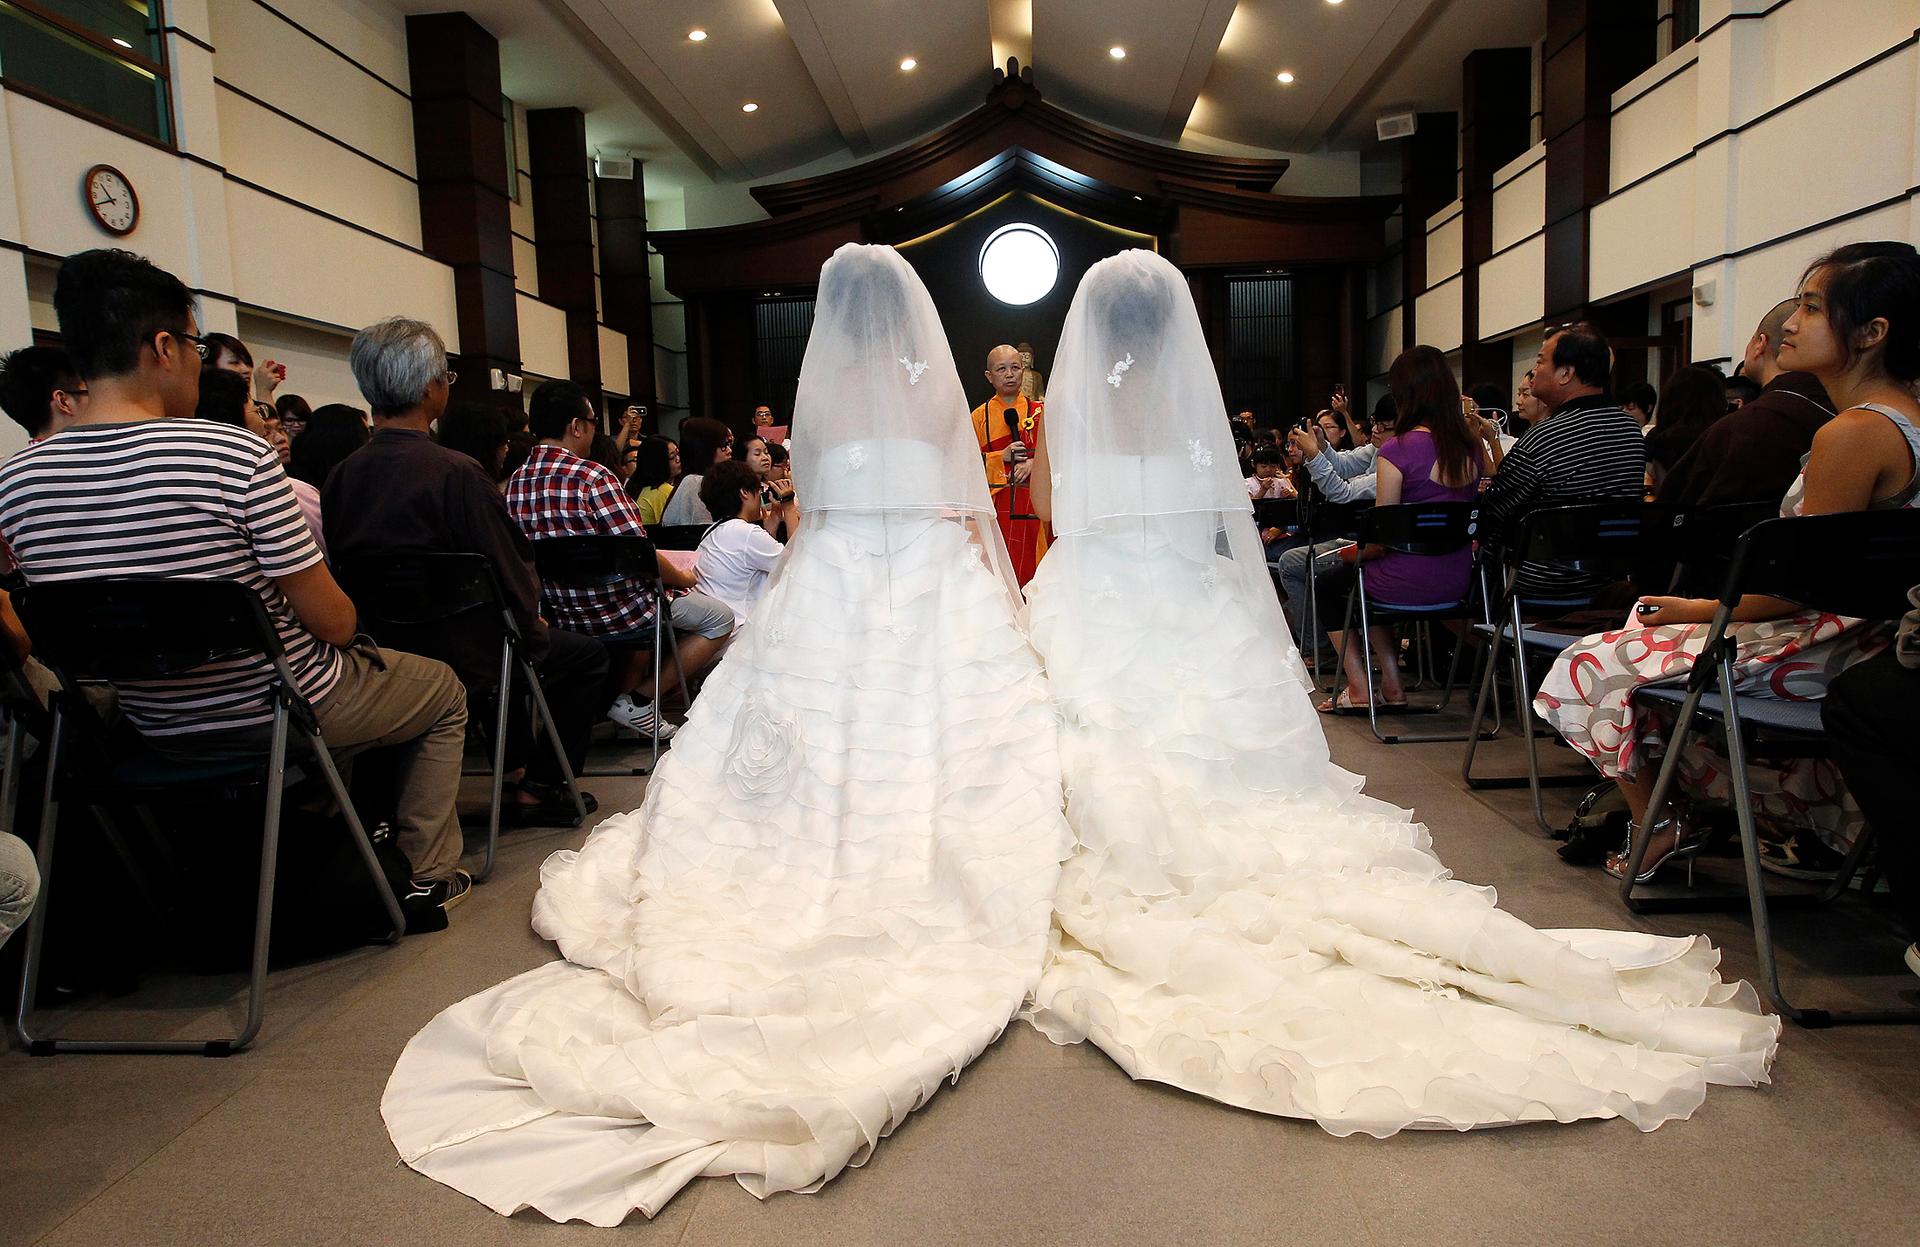 You Ya-ting and Huang Mei-yu take part in a symbolic same-sex Buddhist wedding ceremony at a temple in Taoyuan county, northern Taiwan, August 11, 2012.